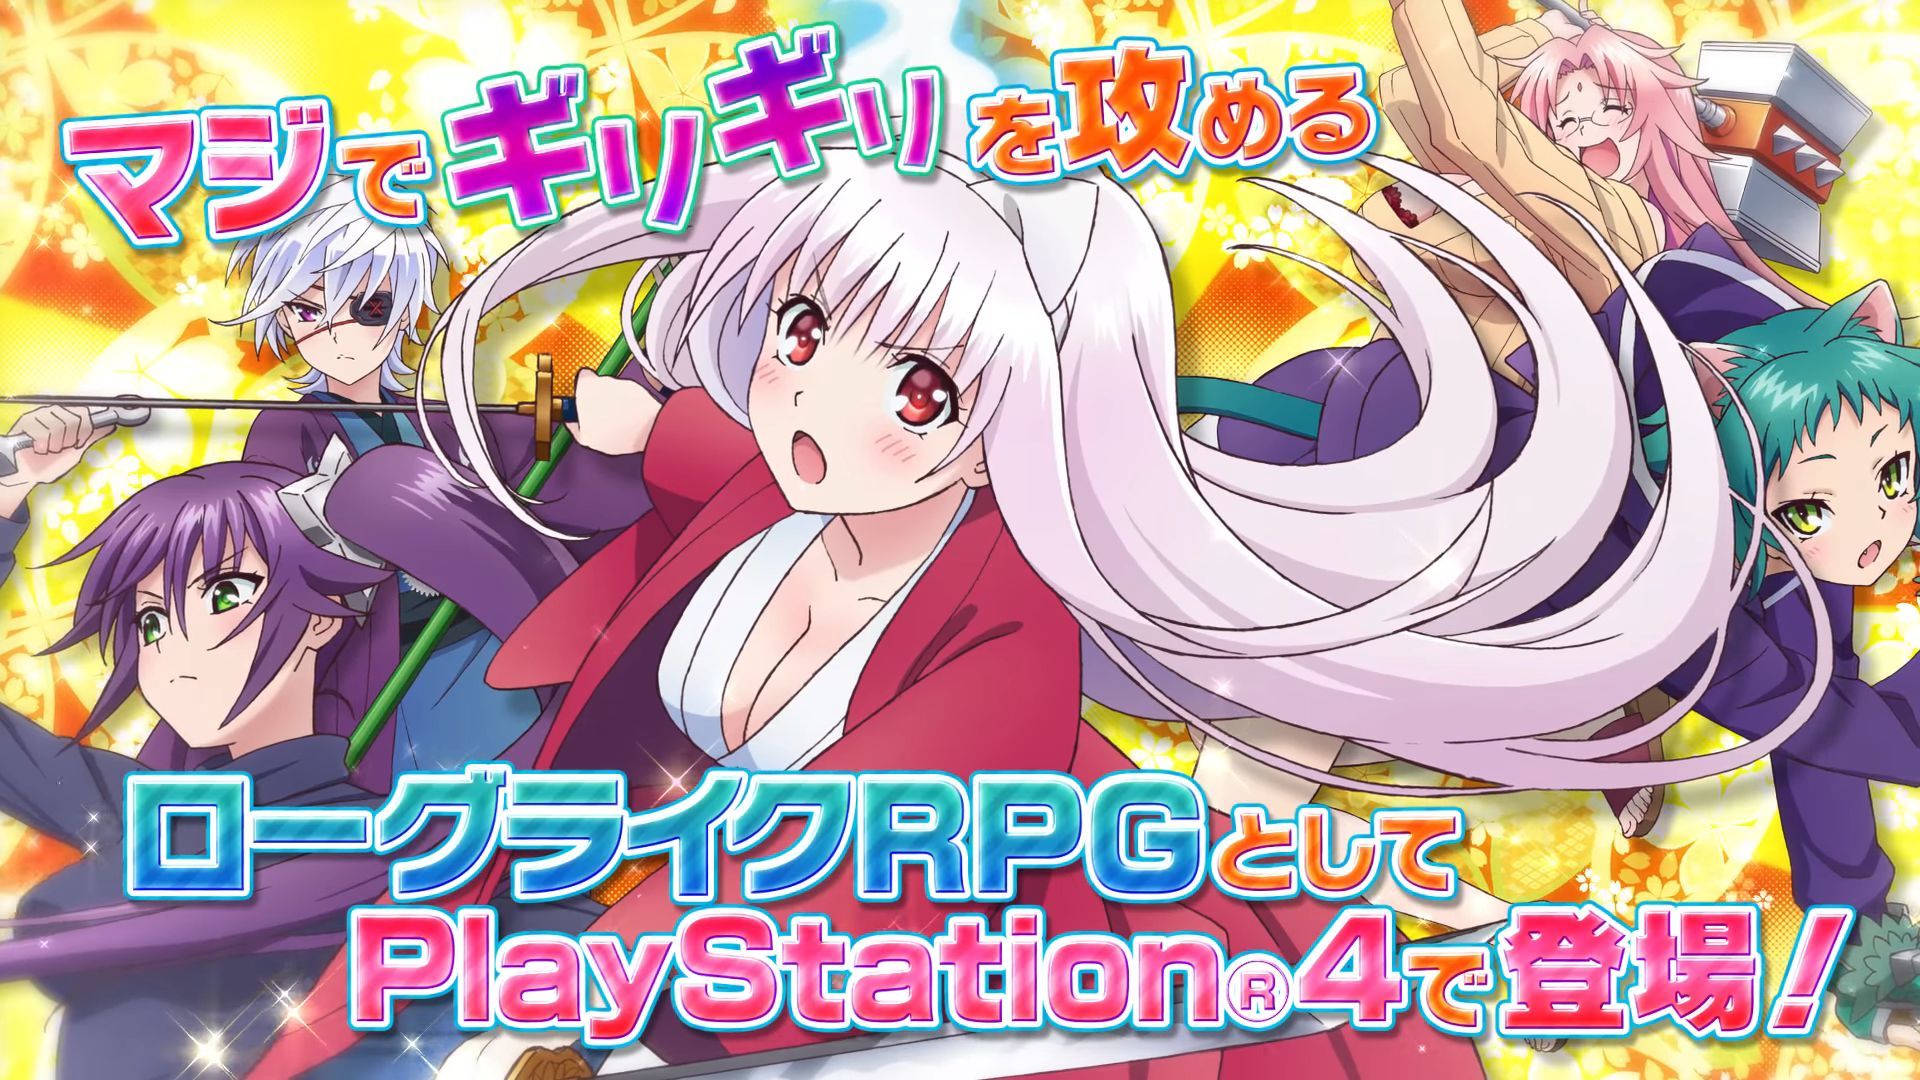 Yuuna And The Haunted Hot Springs For Ps4 Gets New Trailer Showing